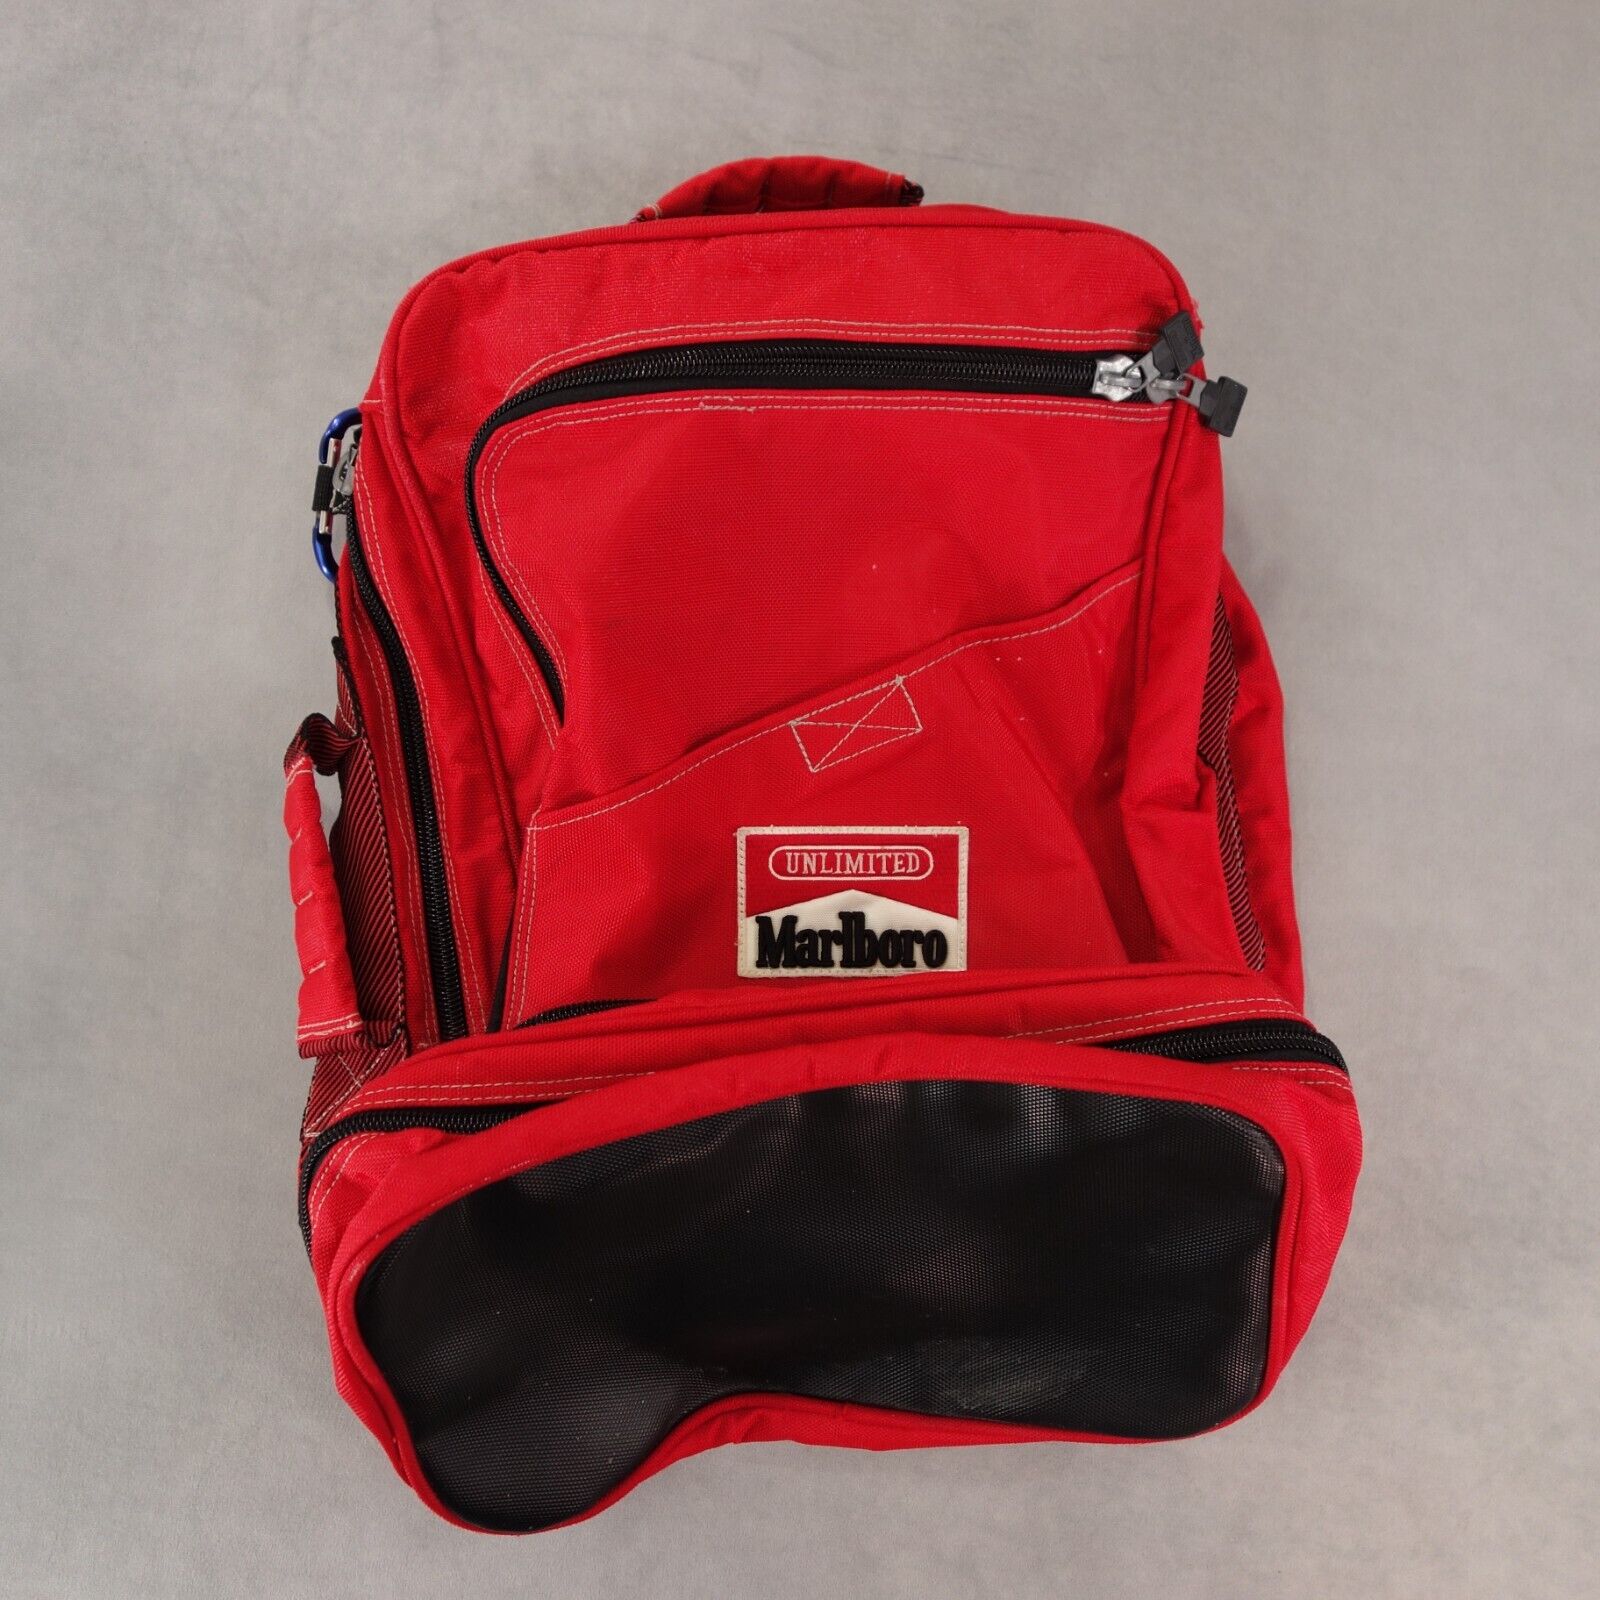 Vintage Marlboro Bag Backpack Red Camping Hiking Outdoor Collectable